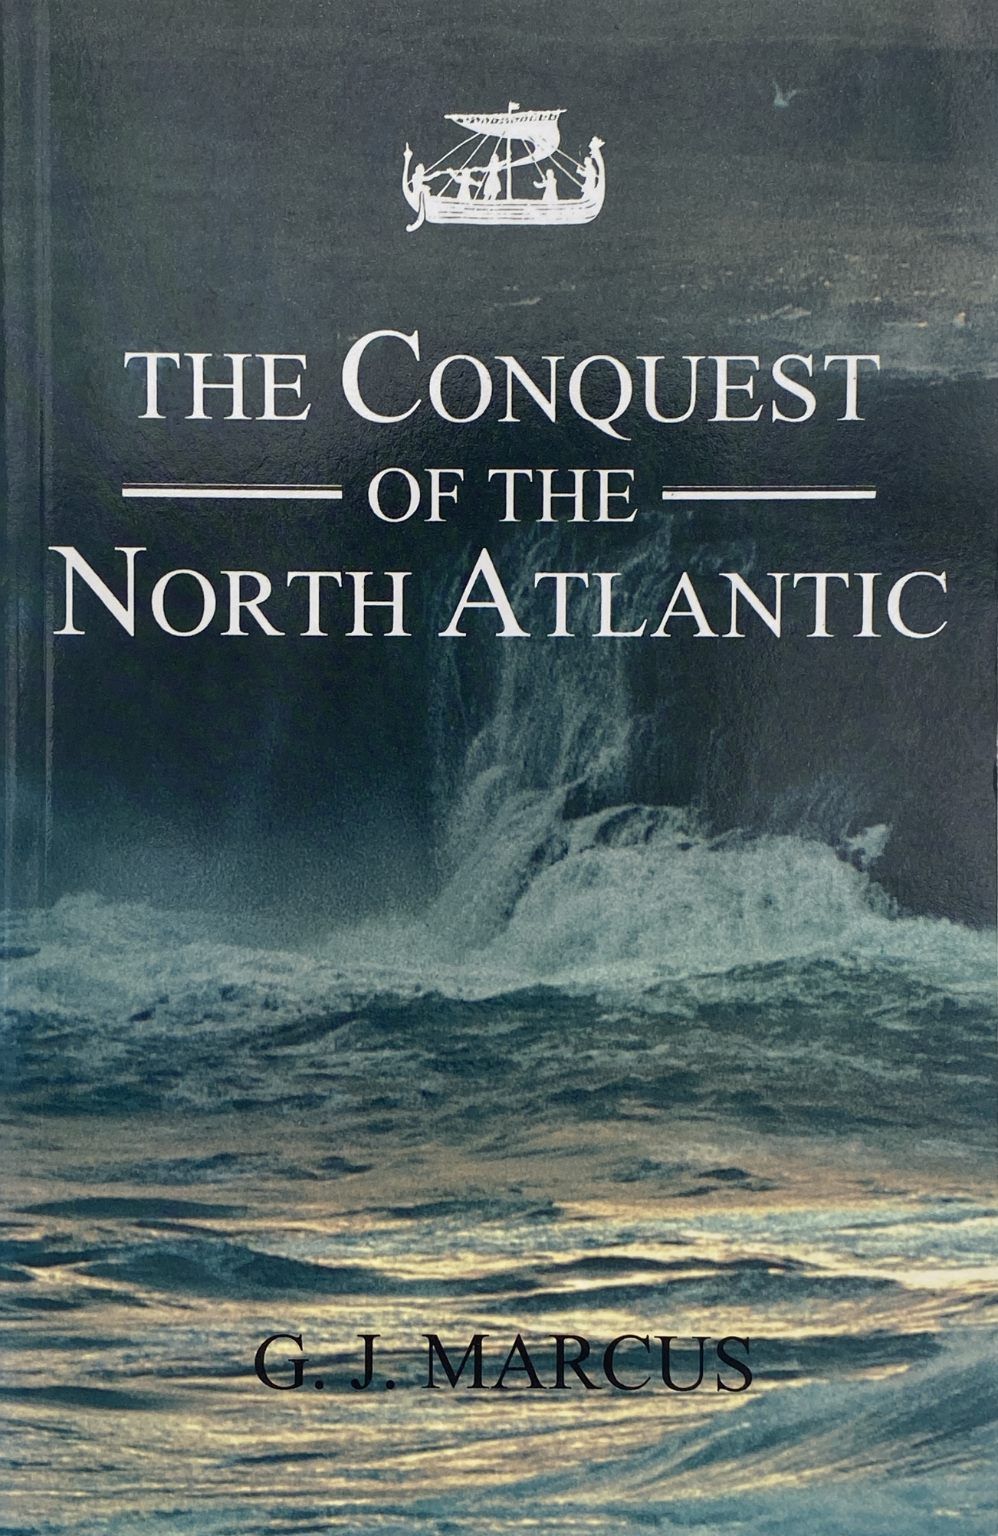 THE CONQUEST OF THE NORTH ATLANTIC